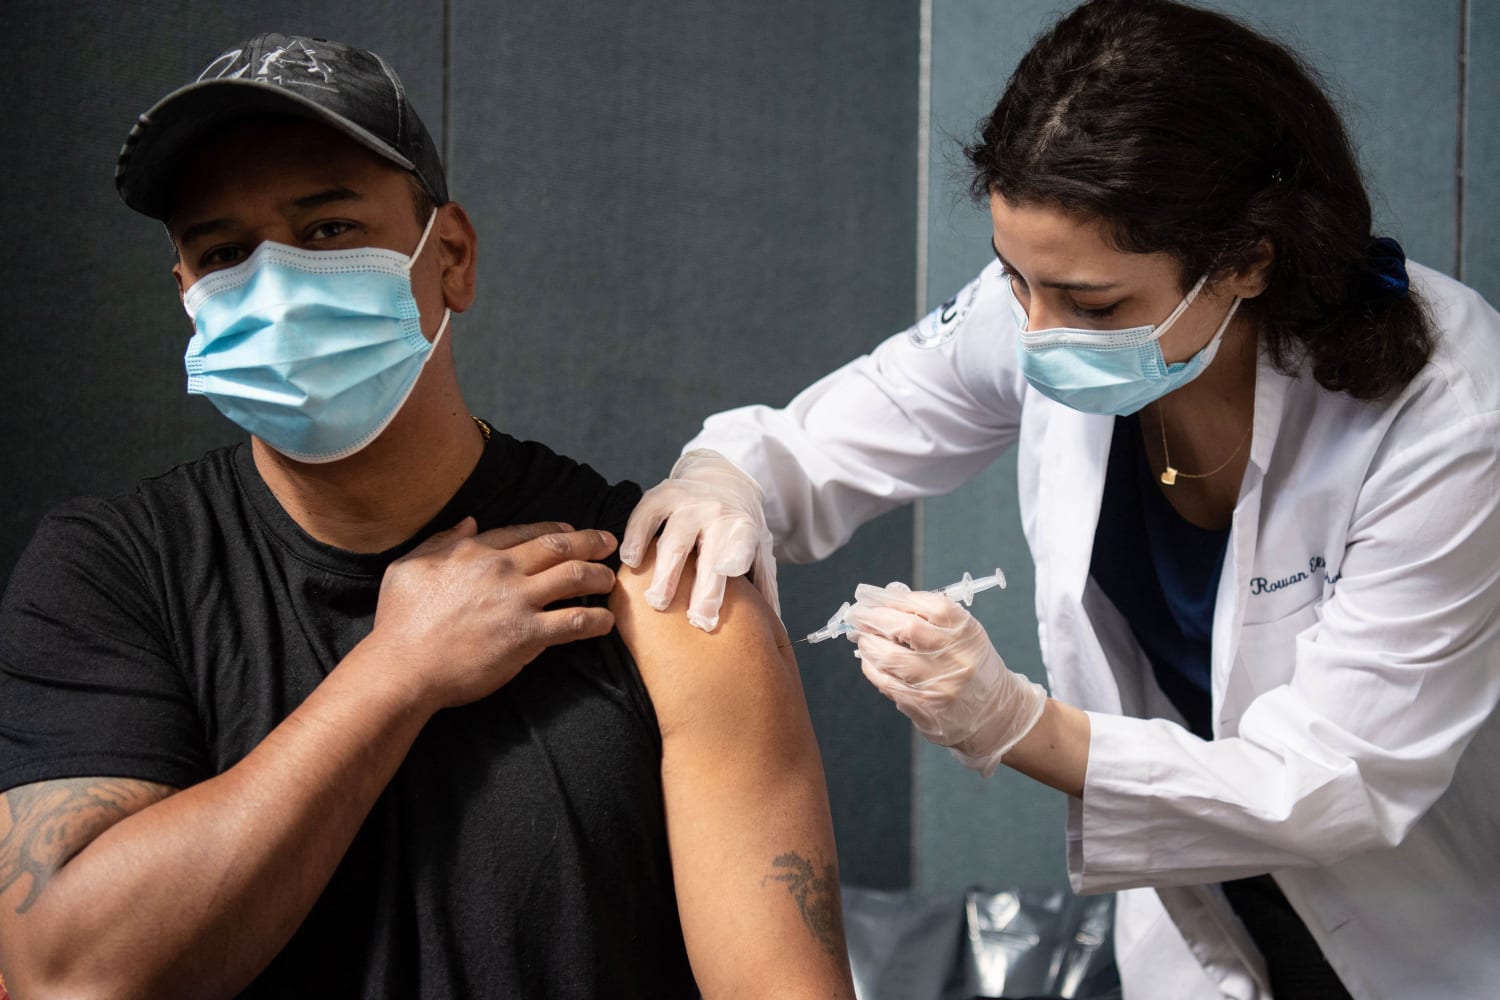 Fully vaccinated people don't need Covid boosters, U.S. health agencies say